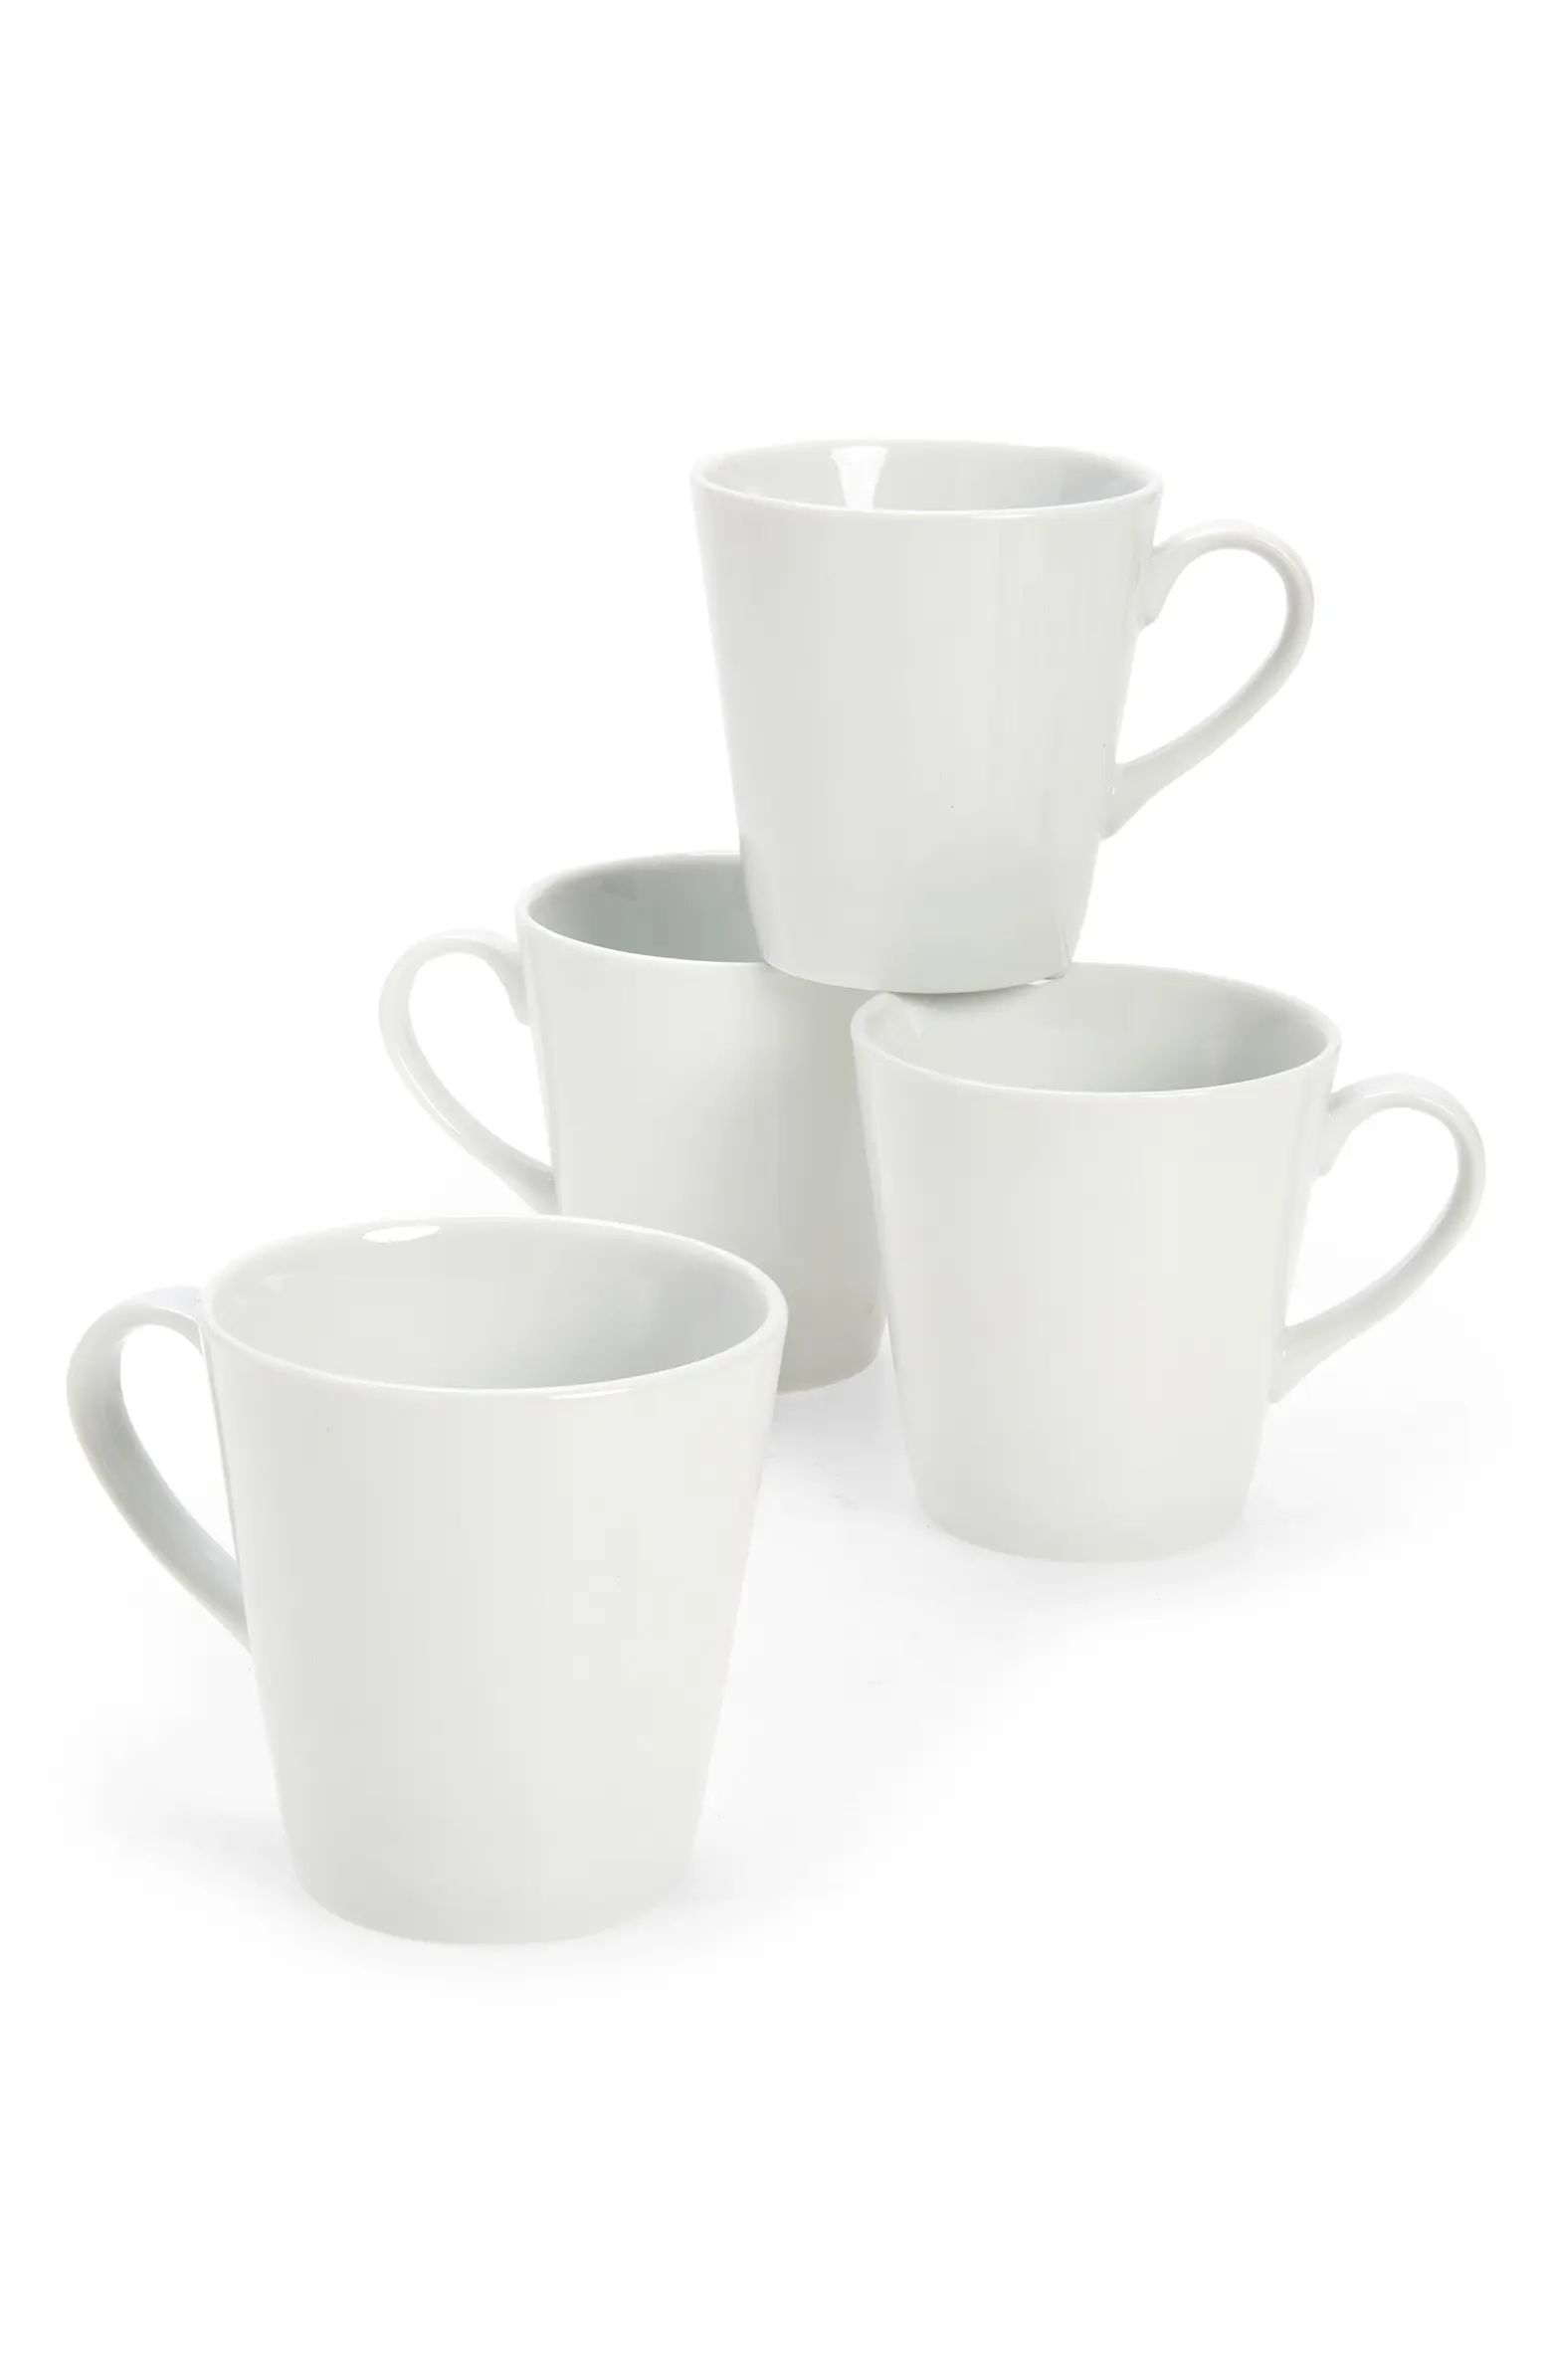 Coupe Set of 4 Coffee Cups | Nordstrom